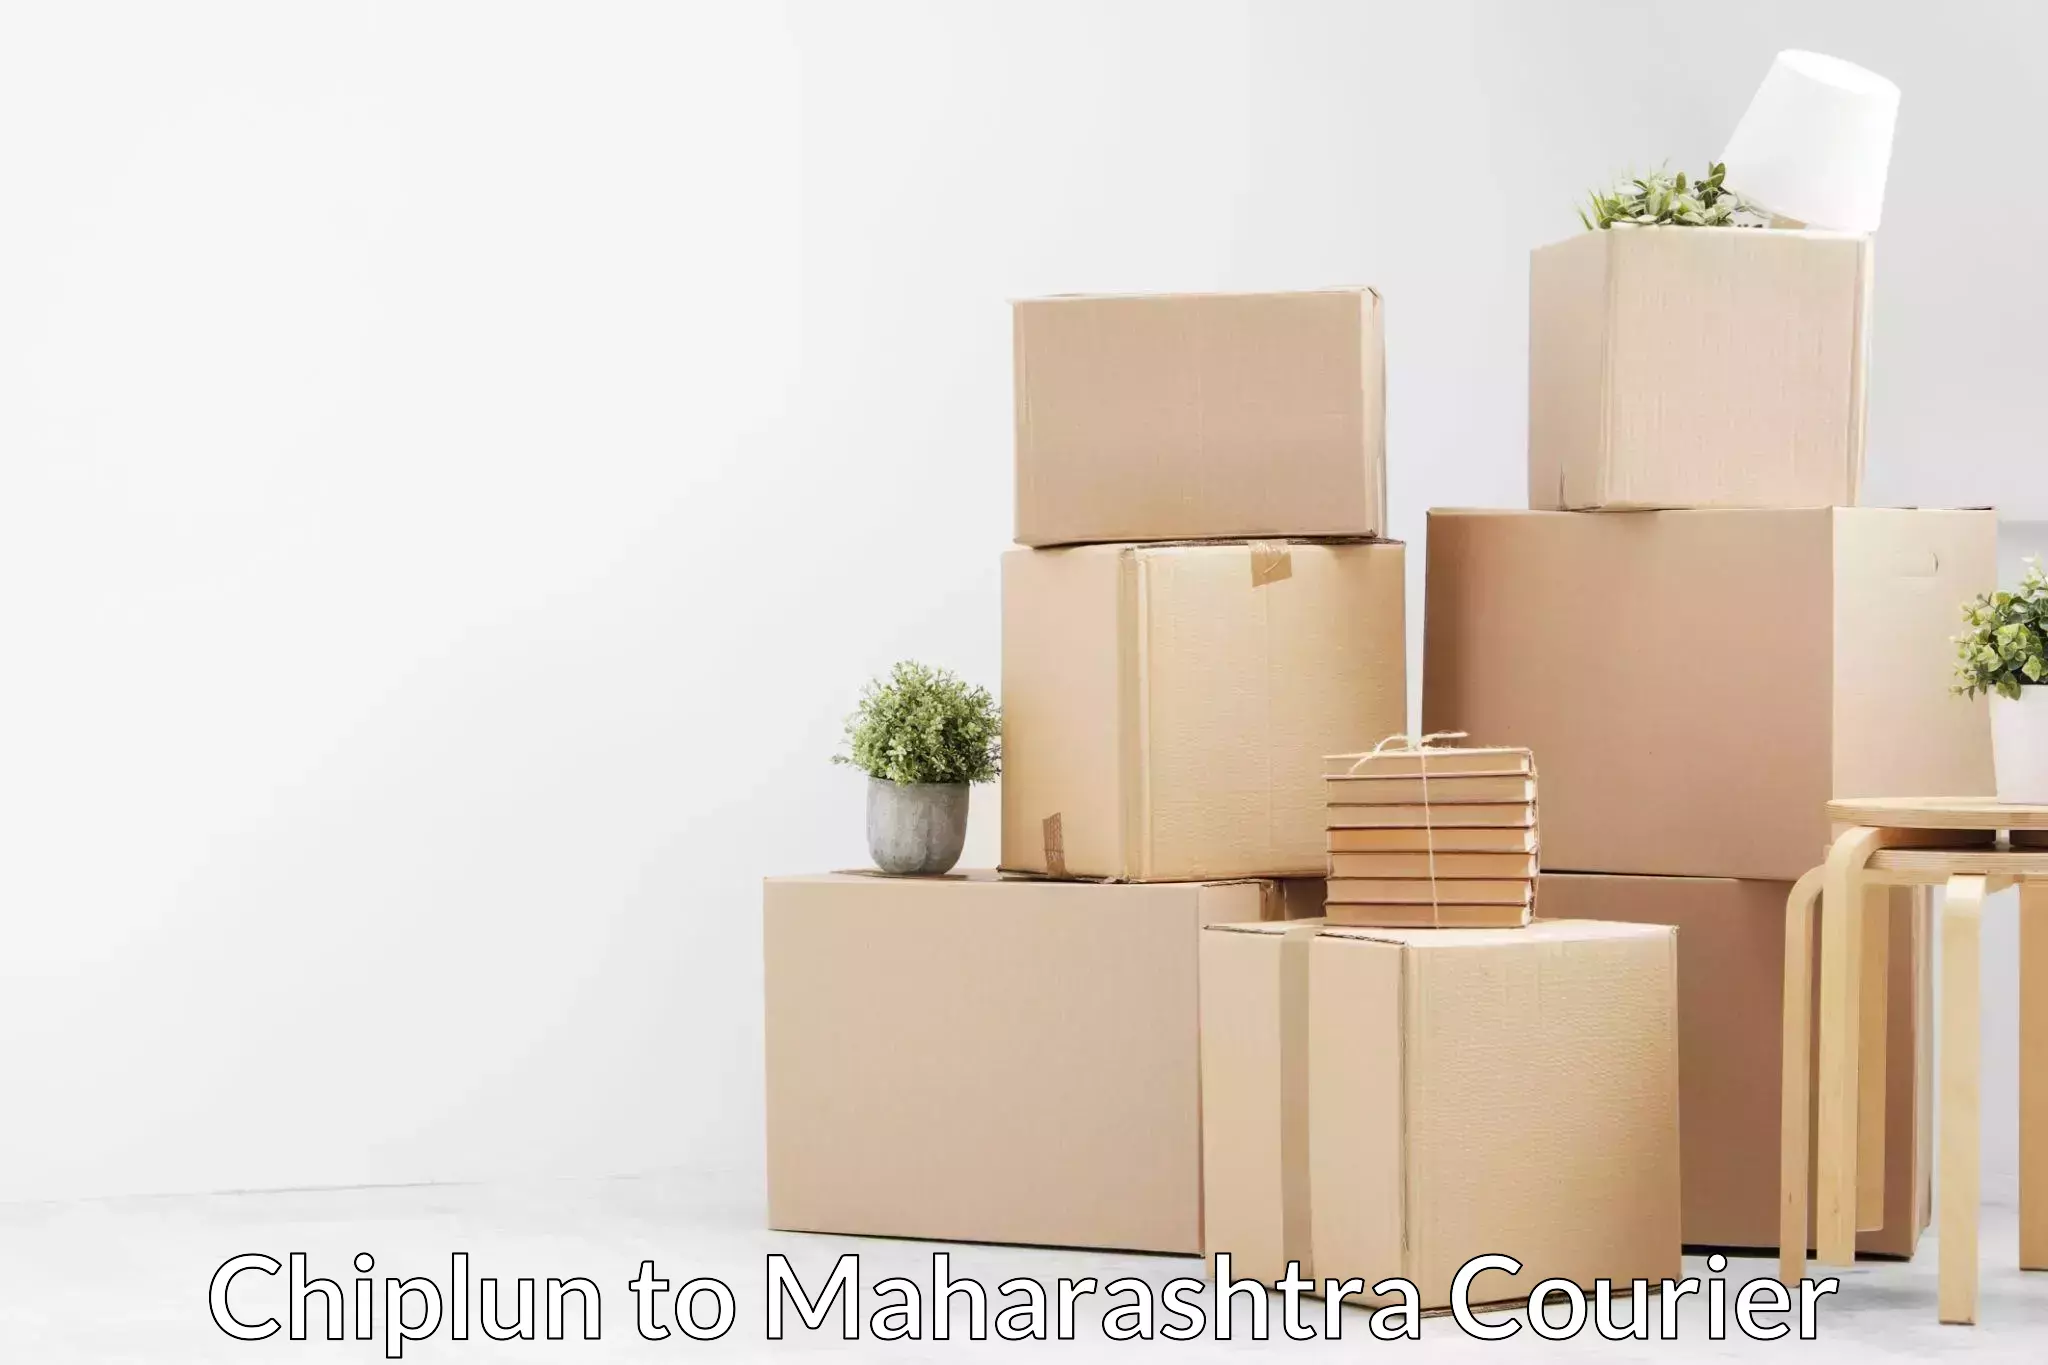 Quality relocation assistance Chiplun to Amalner